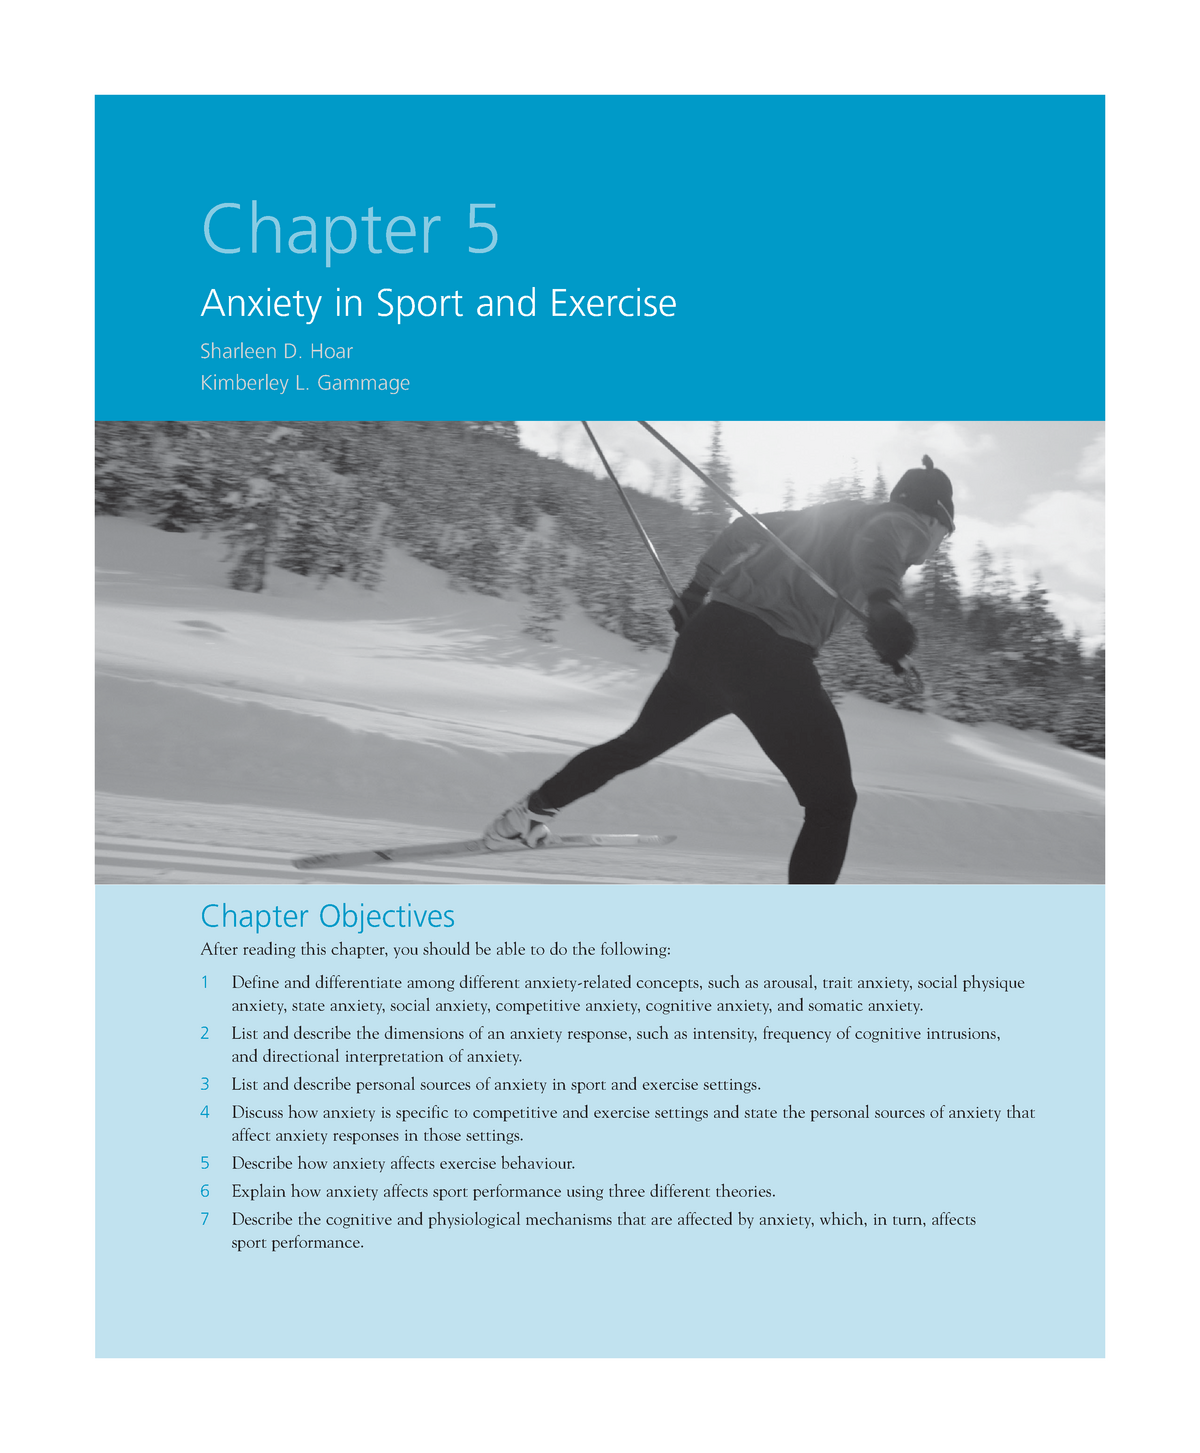 Sport and Exercise Psychology: A Canadian Perspective